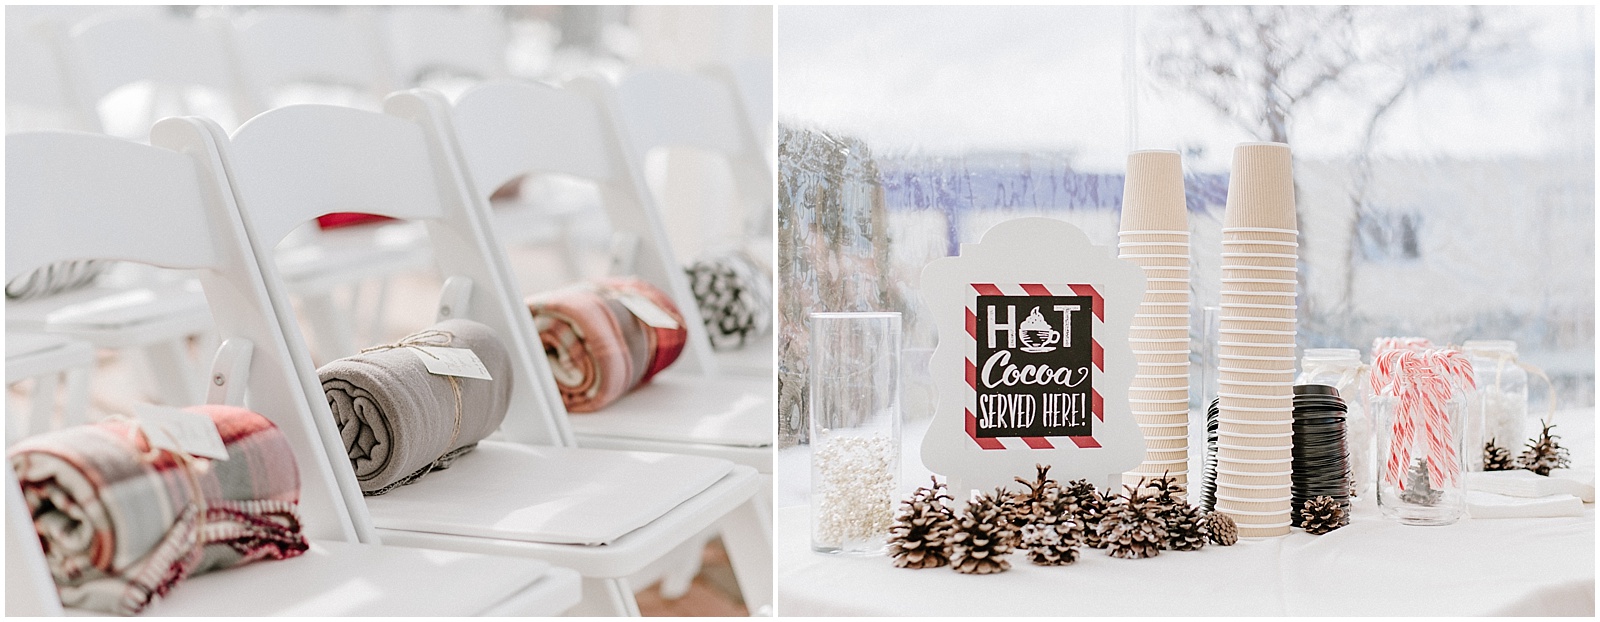 winter wedding outdoor ceremony blankets and hot chocolate